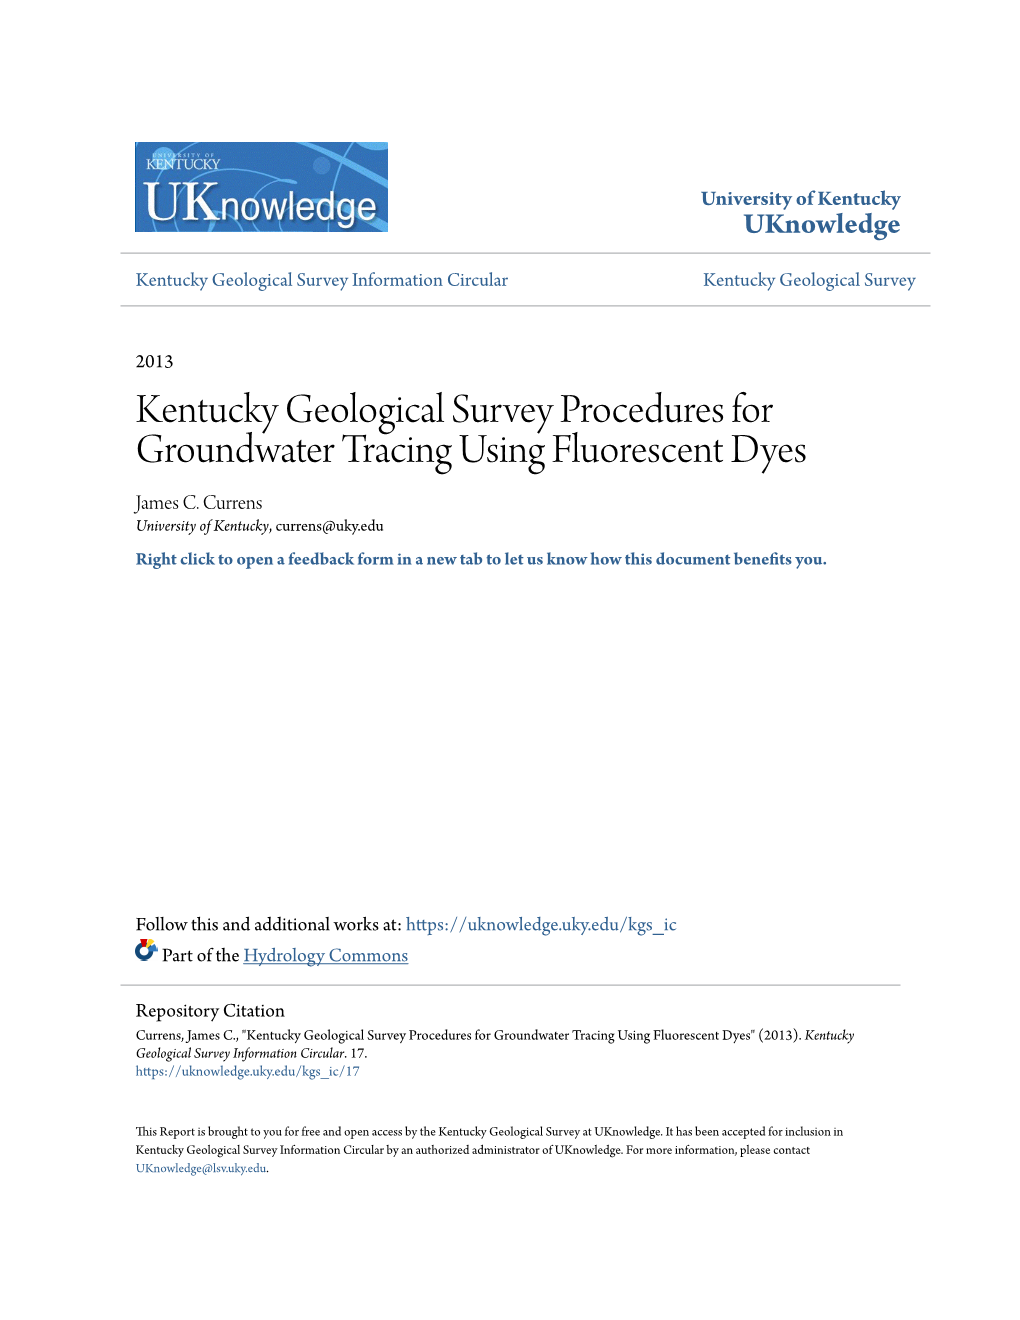 Kentucky Geological Survey Procedures for Groundwater Tracing Using Fluorescent Dyes James C